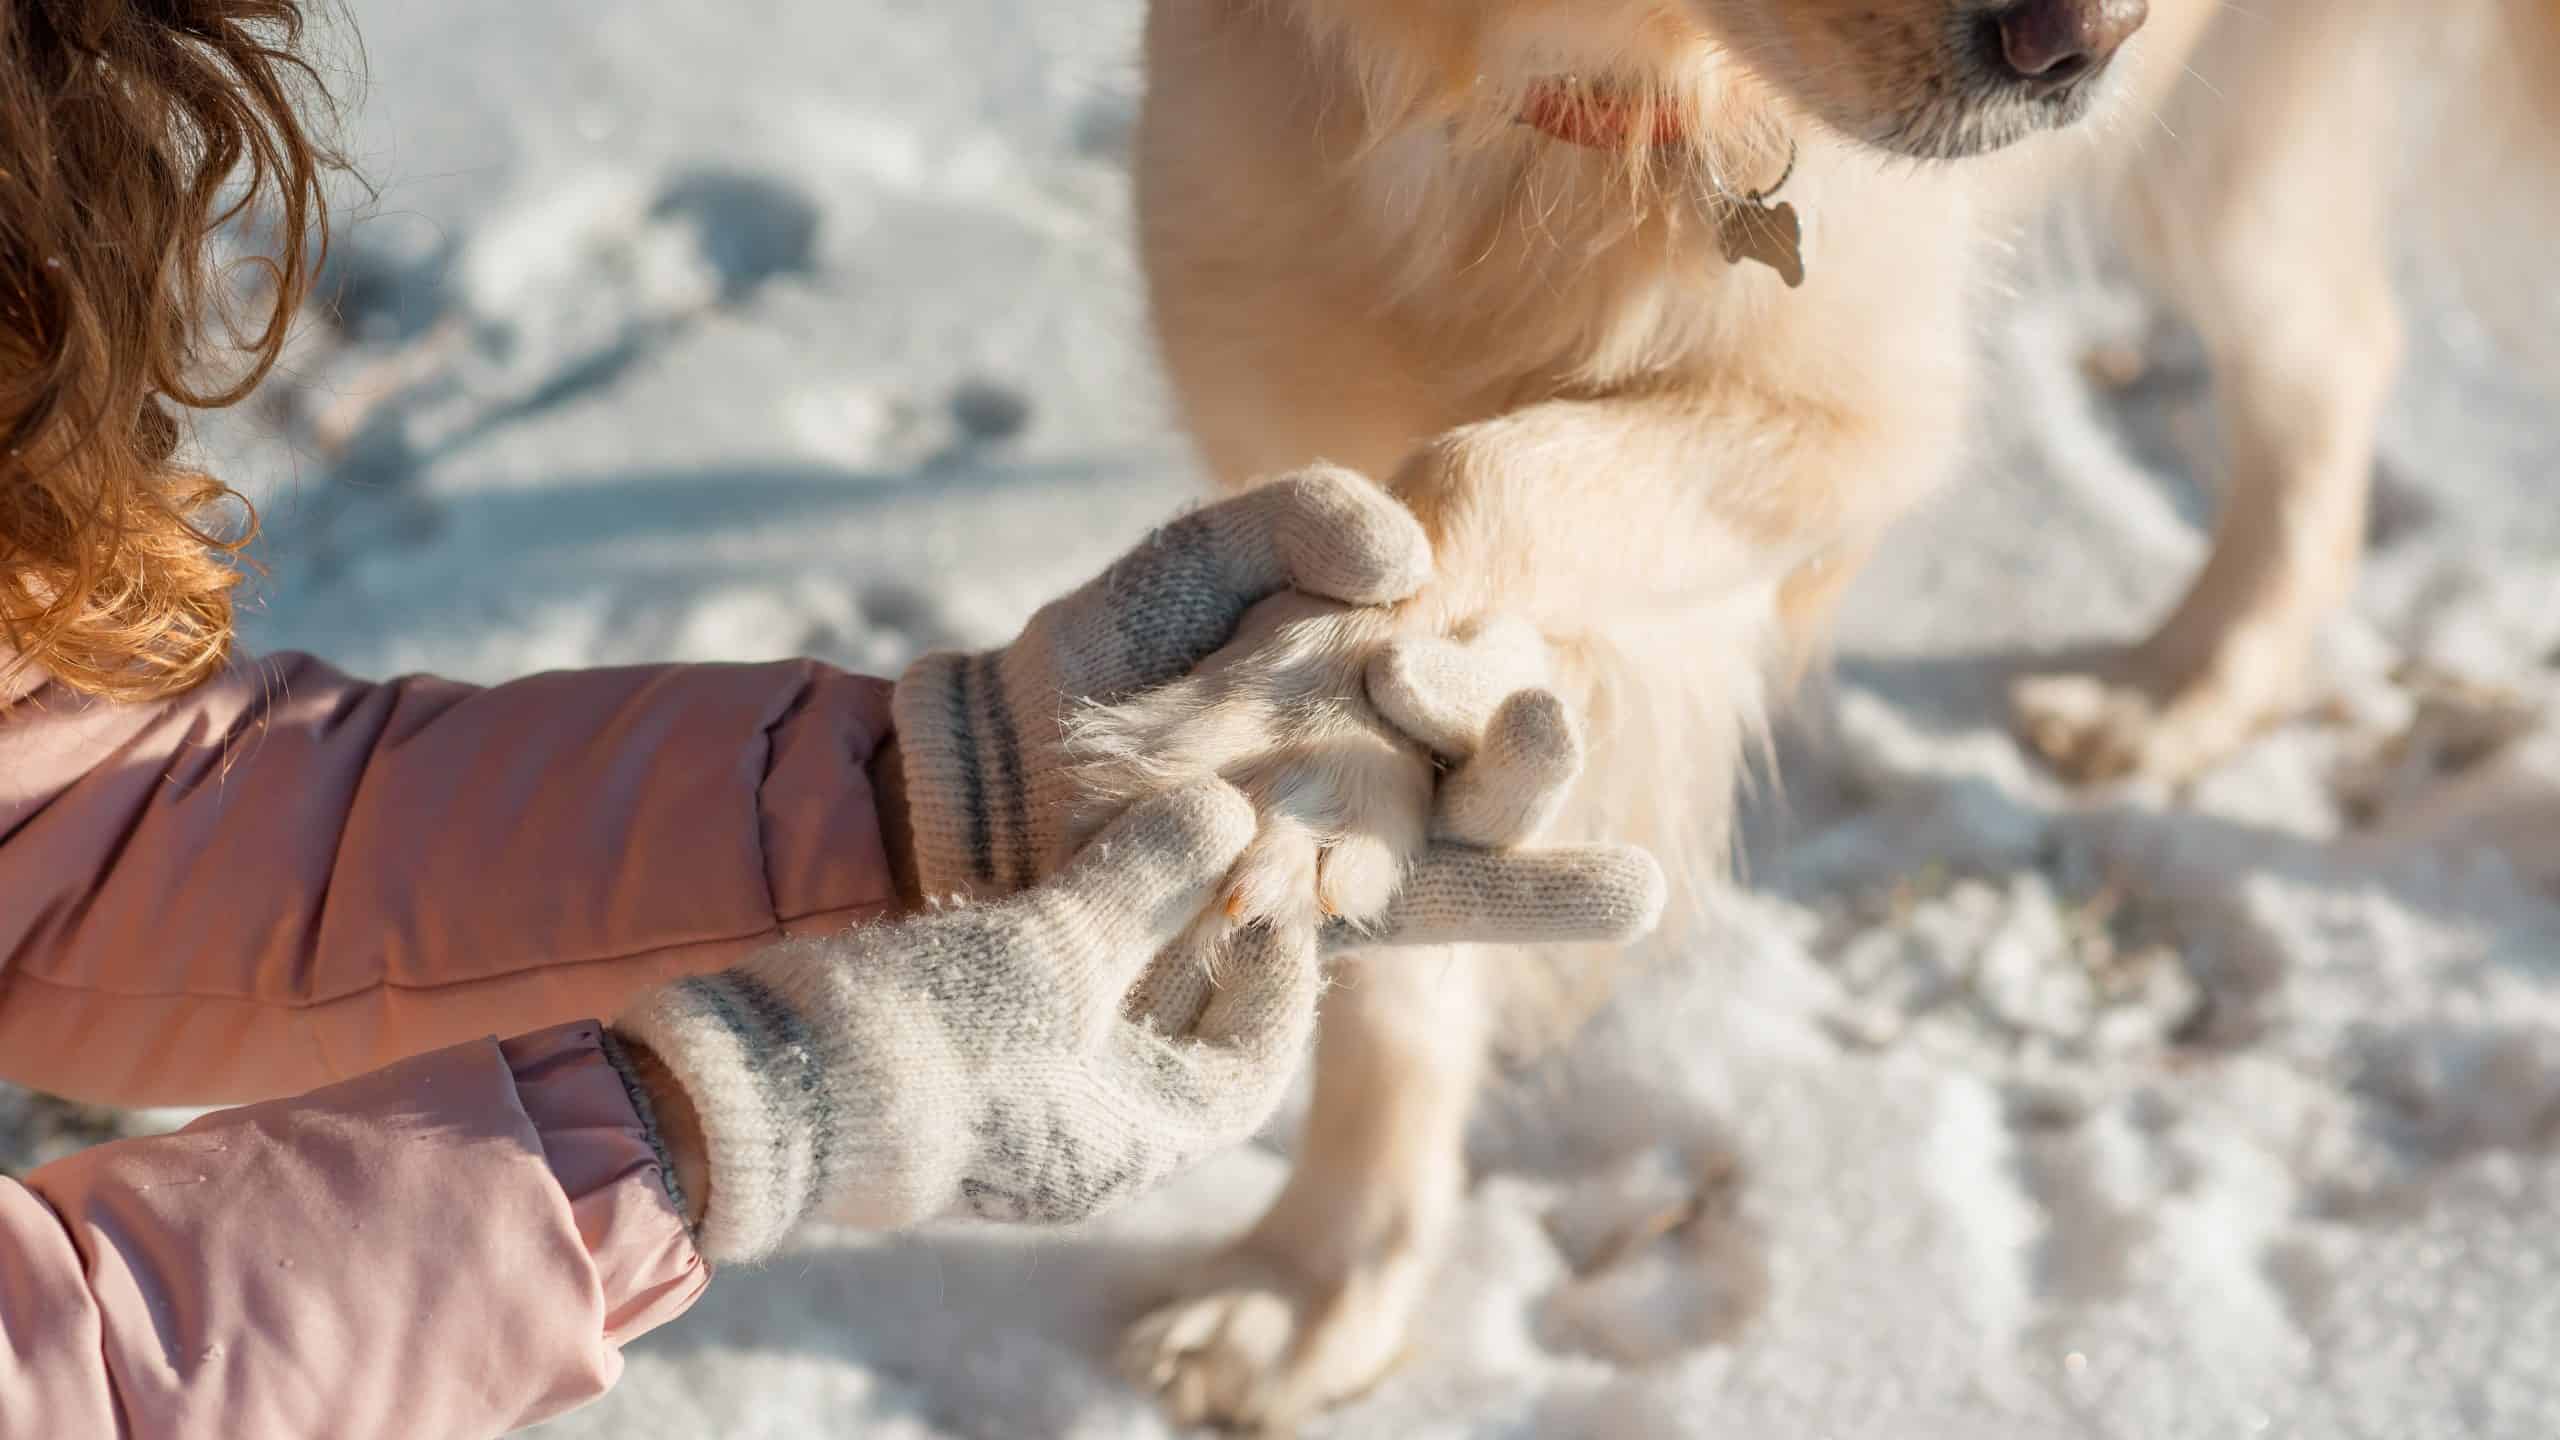 A woman helps a dog clear its paws of snow.